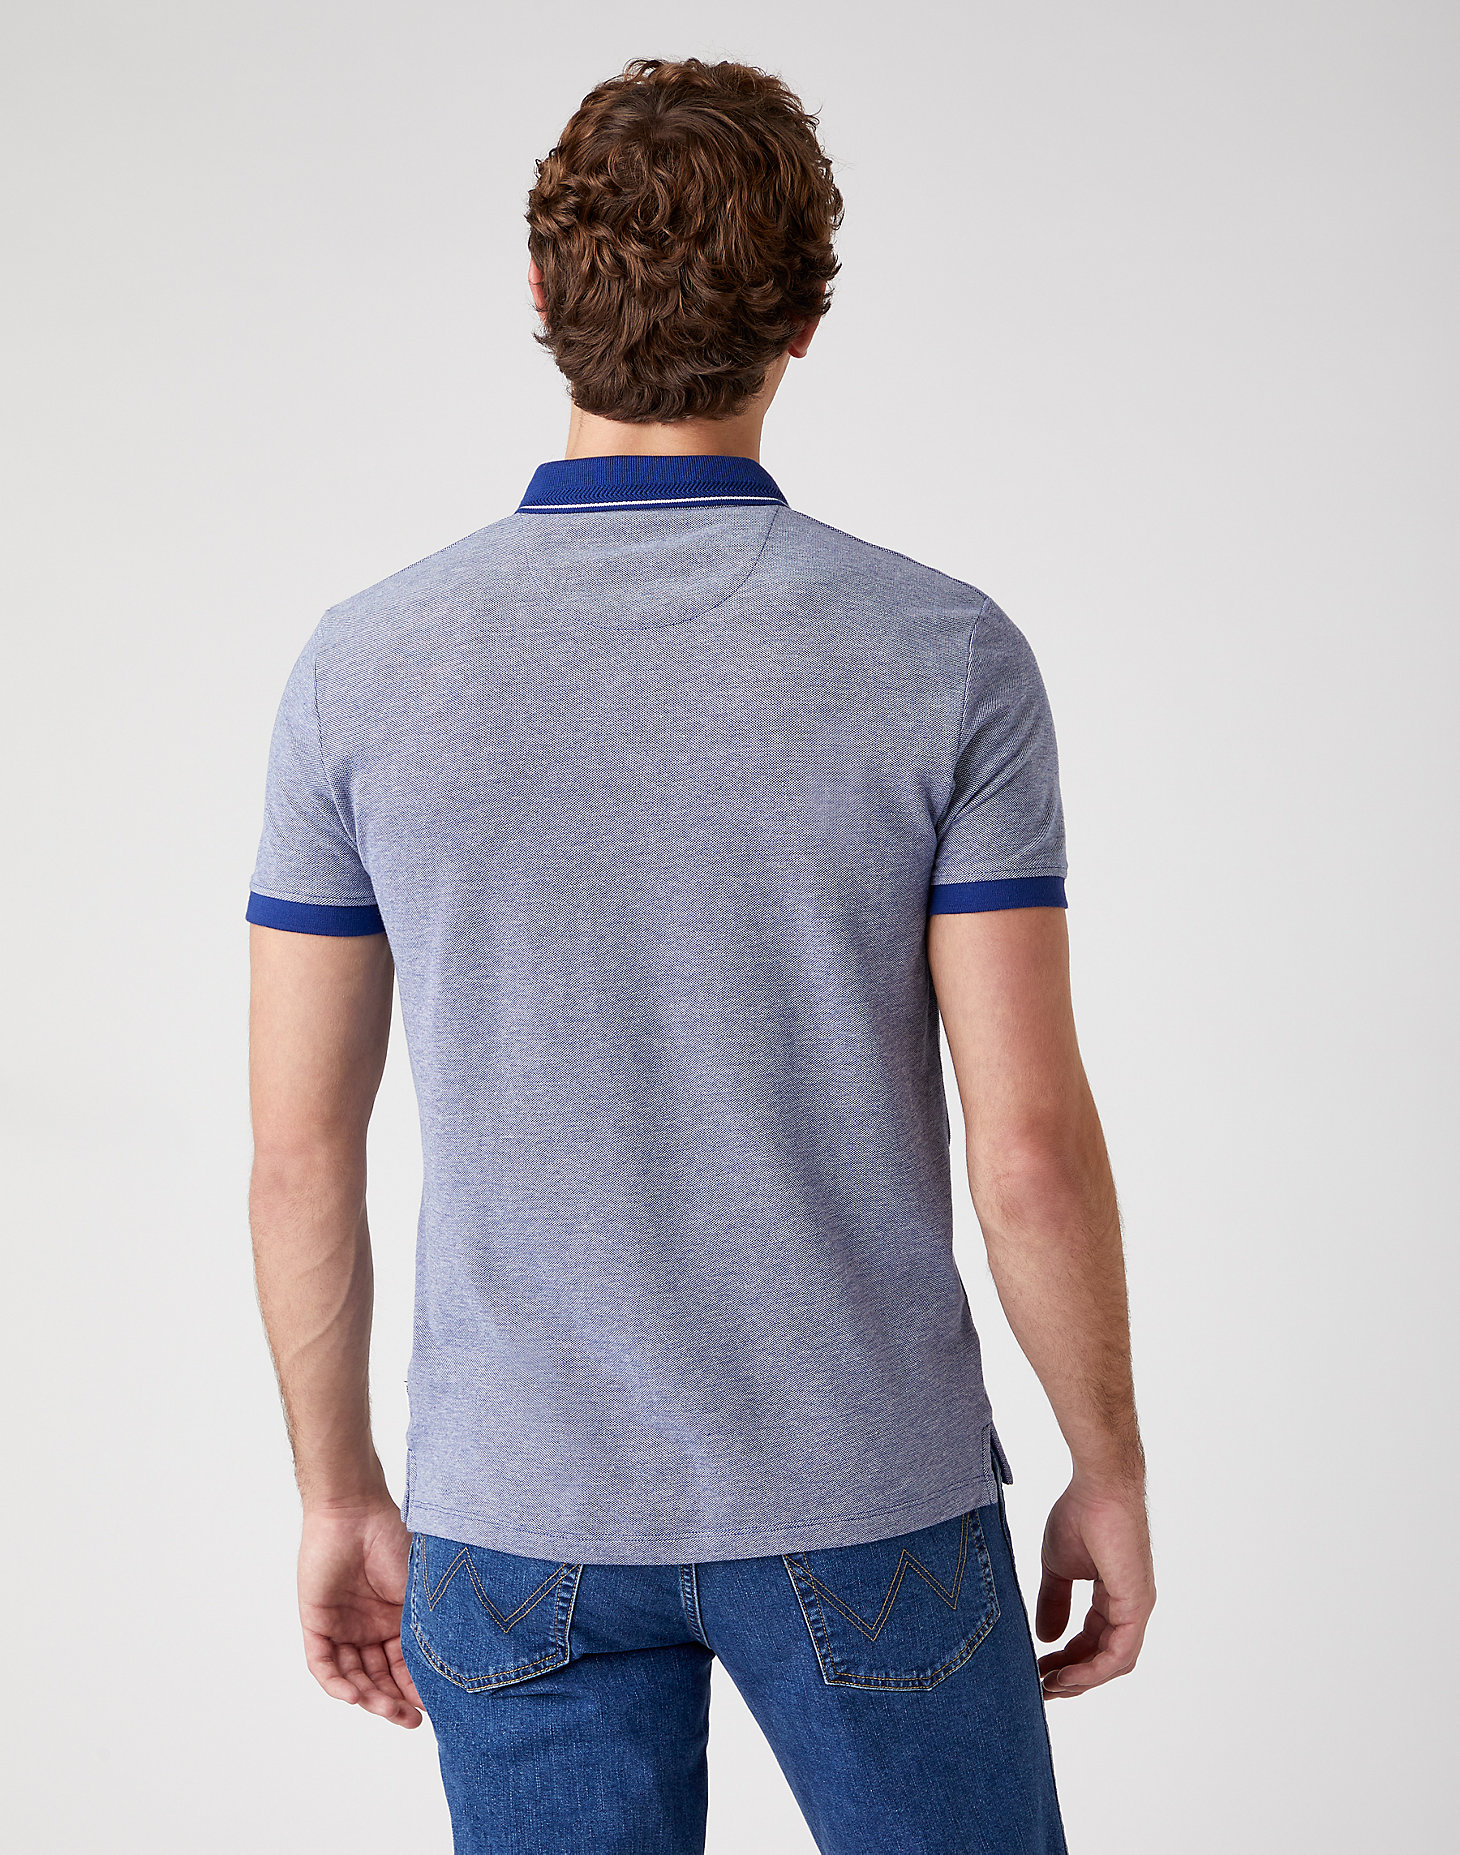 Short Sleeve Refined Polo in Twilight Blue 1 alternative view 2